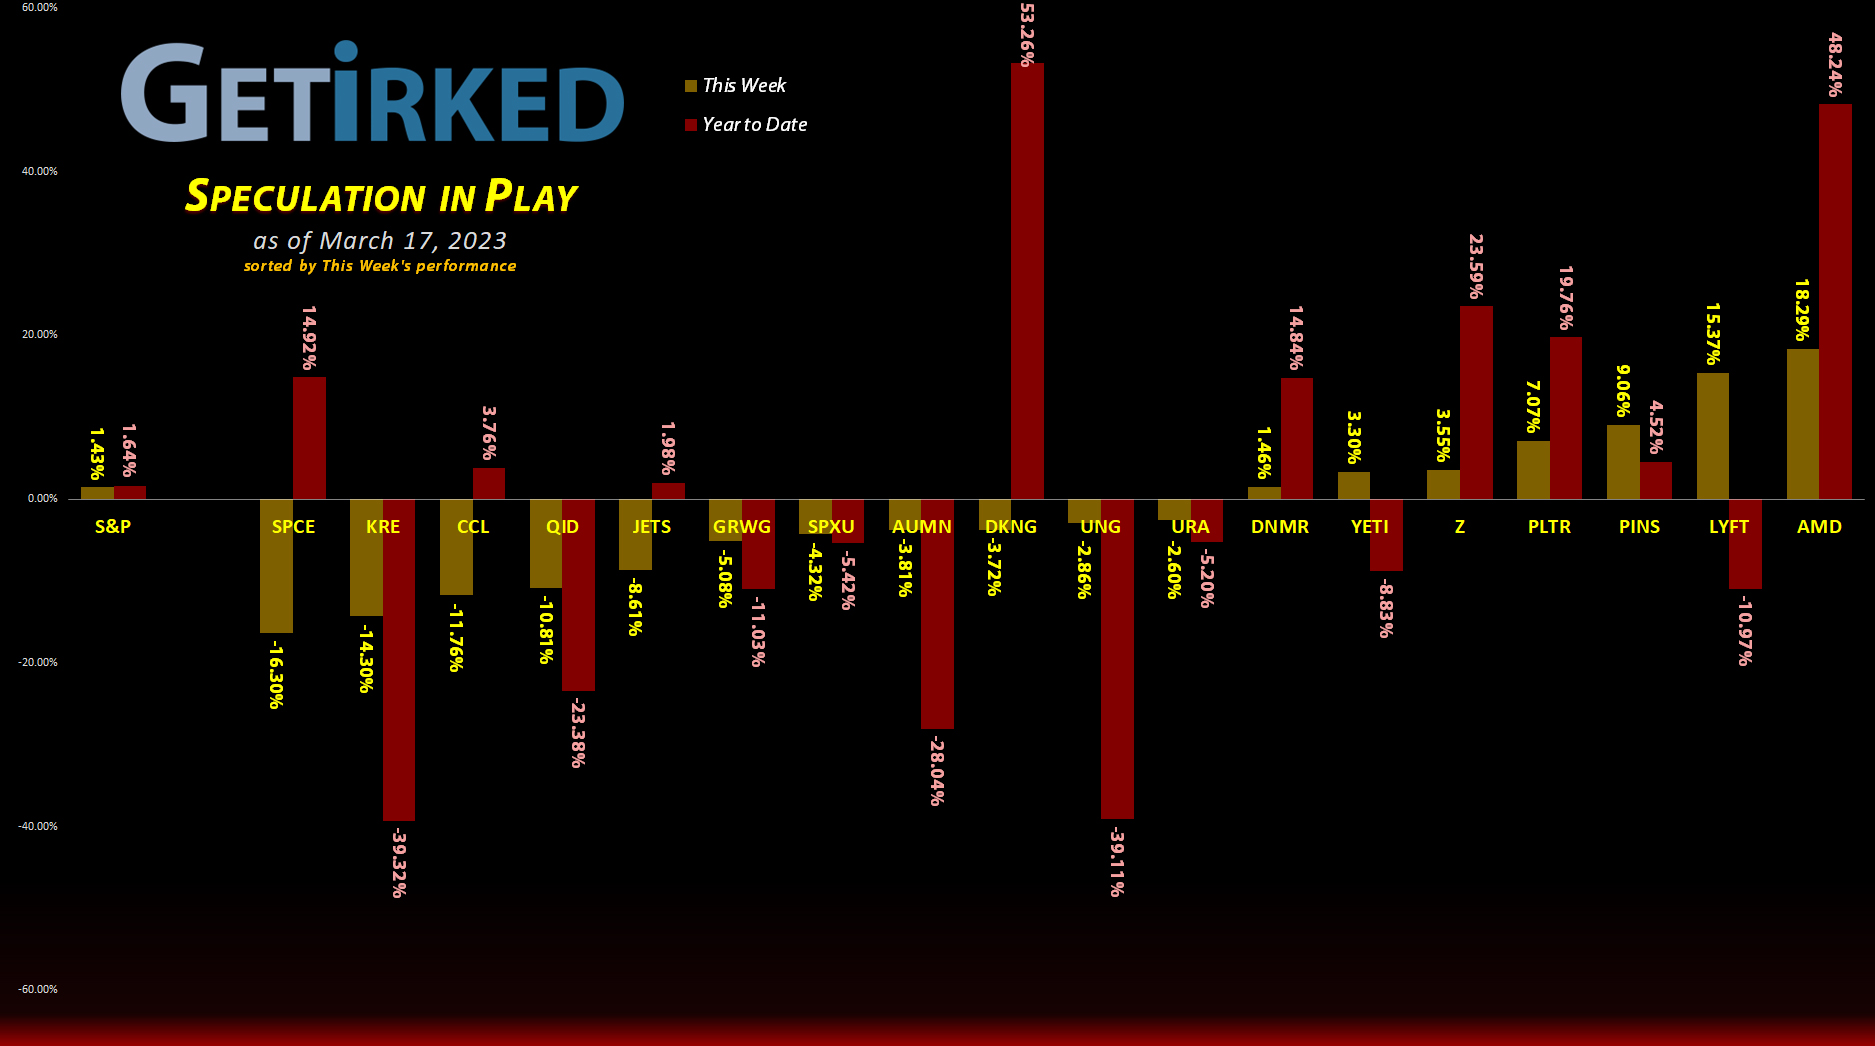 Get Irked's Speculation in Play - March 17 2023